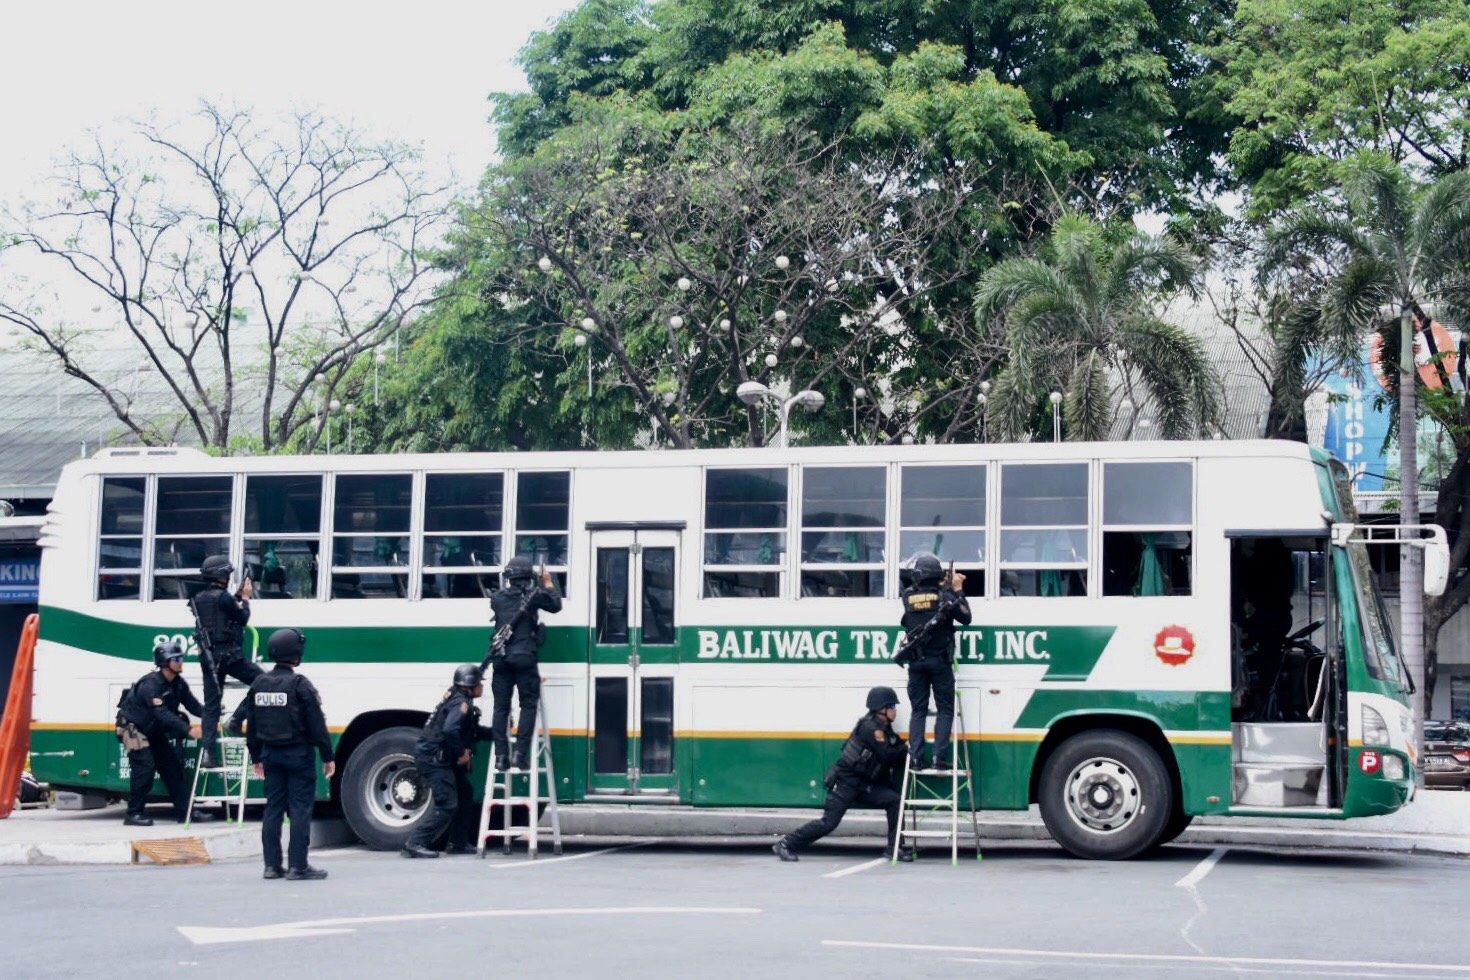 CRISIS RESPONSE. Police operatives assault a bus during a hostage-taking drill, part of a police anti-terrorism simulation exercise in Cubao, Quezon City, on April 12, 2018. Photo by Angie de Silva/Rappler   